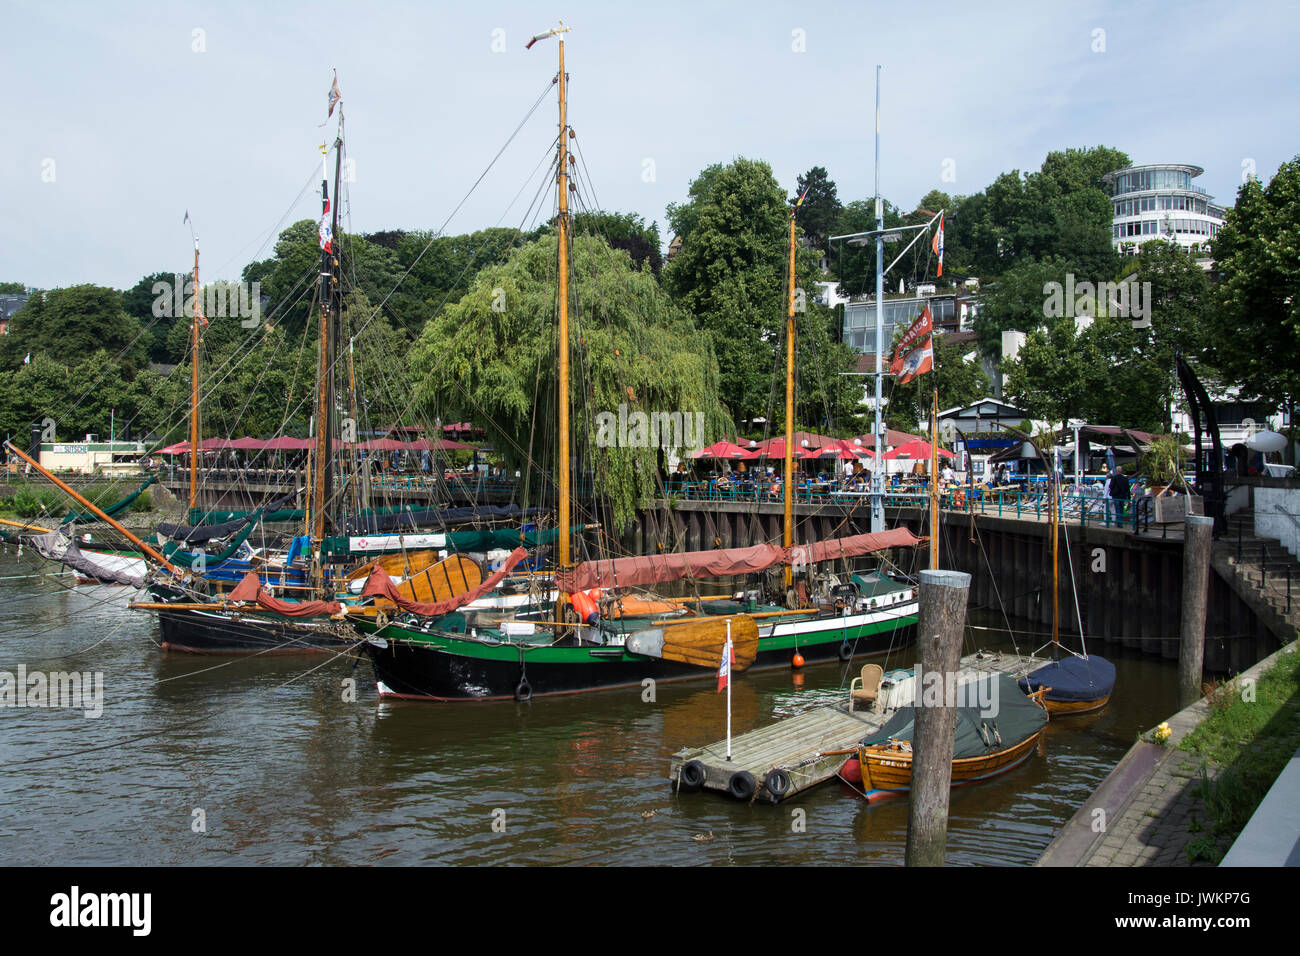 Museumshafen Oevelgonne (open air harbour museum) on the Elbe, Hamburg, Germany Stock Photo